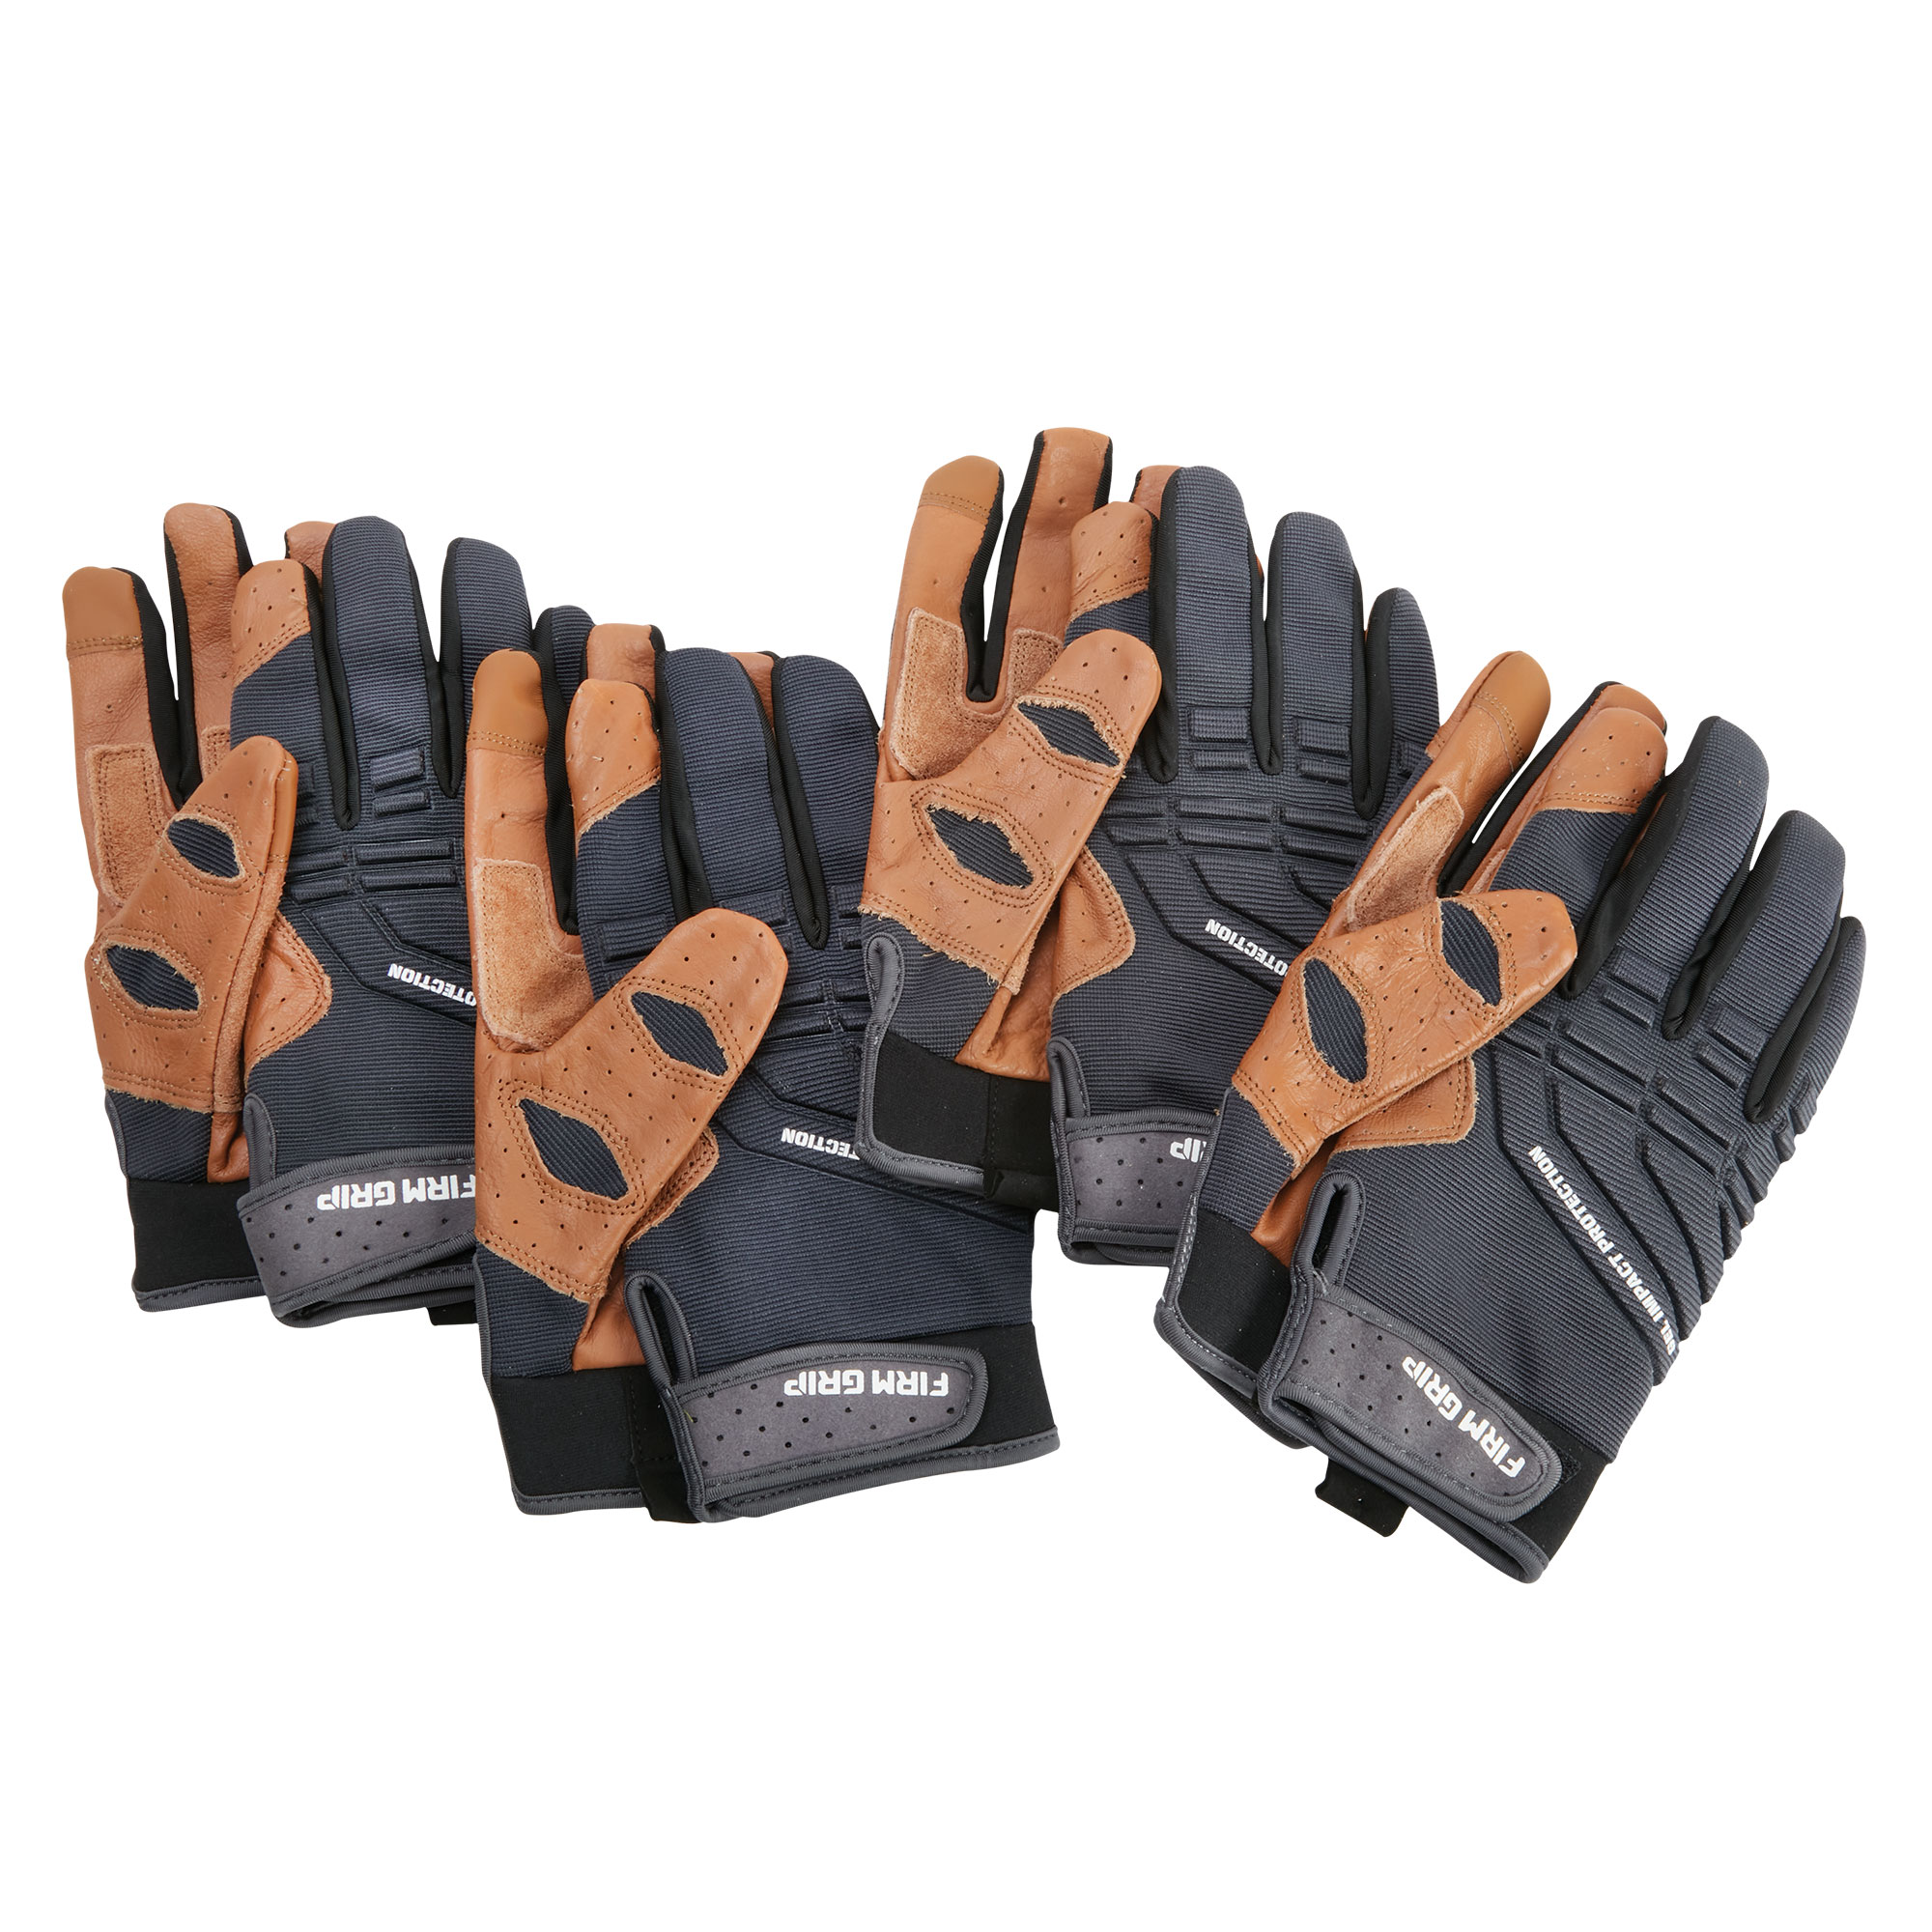 Firm Grip Utility Gloves - 4 Pack